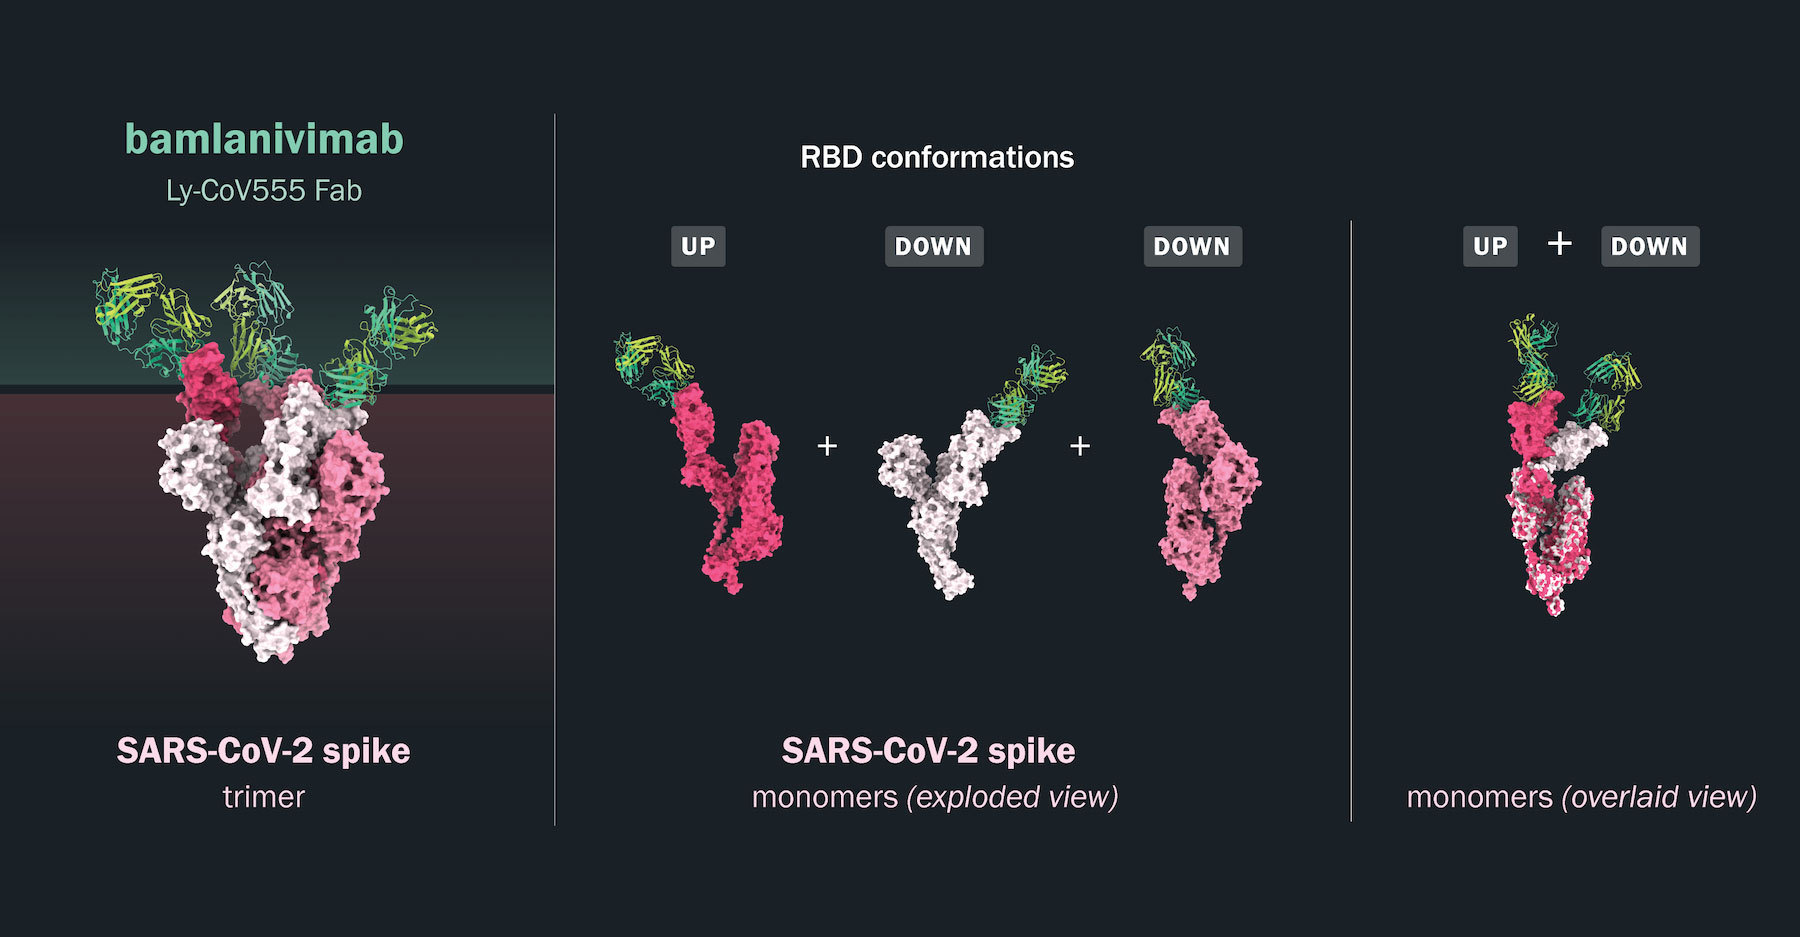 The unique binding of bamlanivimab to the SARS-CoV-2 spike protein: The spike protein exists as a trimer of three identical monomers on the surface of the SARS-CoV-2 virus. Structural modeling (left panel) of the spike trimer in shades of pink and white is shown with the target-binding fragments (Fabs) of bamlanivimab (in green and yellow) bound to the RBD of the spike protein. This analysis shows three bamlanivimab Fab fragments bound to one spike trimer. One of the spike proteins is in the up position (dark pink) with the other two in the down position (light pink and white). The middle panel shows an isolated view of the spike monomers (dark pink, white and light pink) with the bound bamlanivimab Fab fragments in green and yellow. In the right panel, two spike monomers bound in the up and down positions by the bamlanivimab Fab fragments are overlaid. 3D structural model provided by JS McLellan Group, University of Texas.